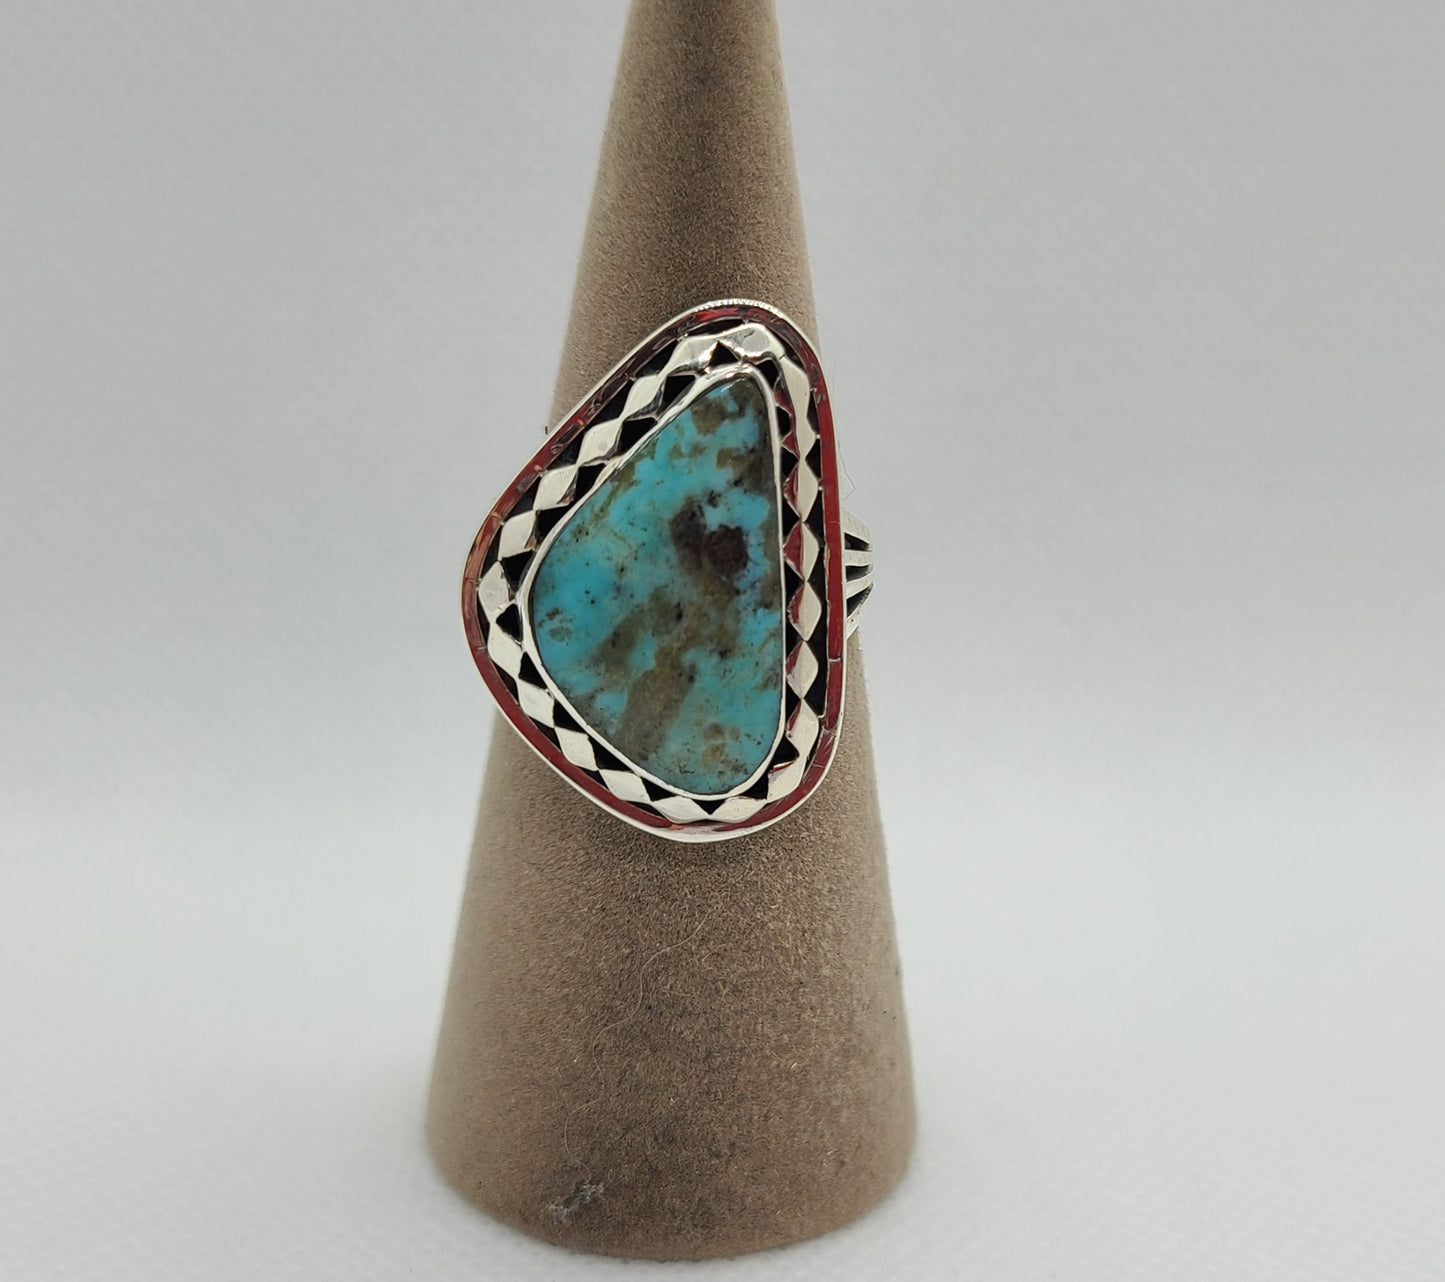 Kingman Turquoise ring has an asymmetrical triangle stone with soft rounded edges.  The stone is a medium blue with brown and black matrix.  The bezel has a continuous diamond design around the stone resting on the backplate.   Split band design. Unisex. Size 9 